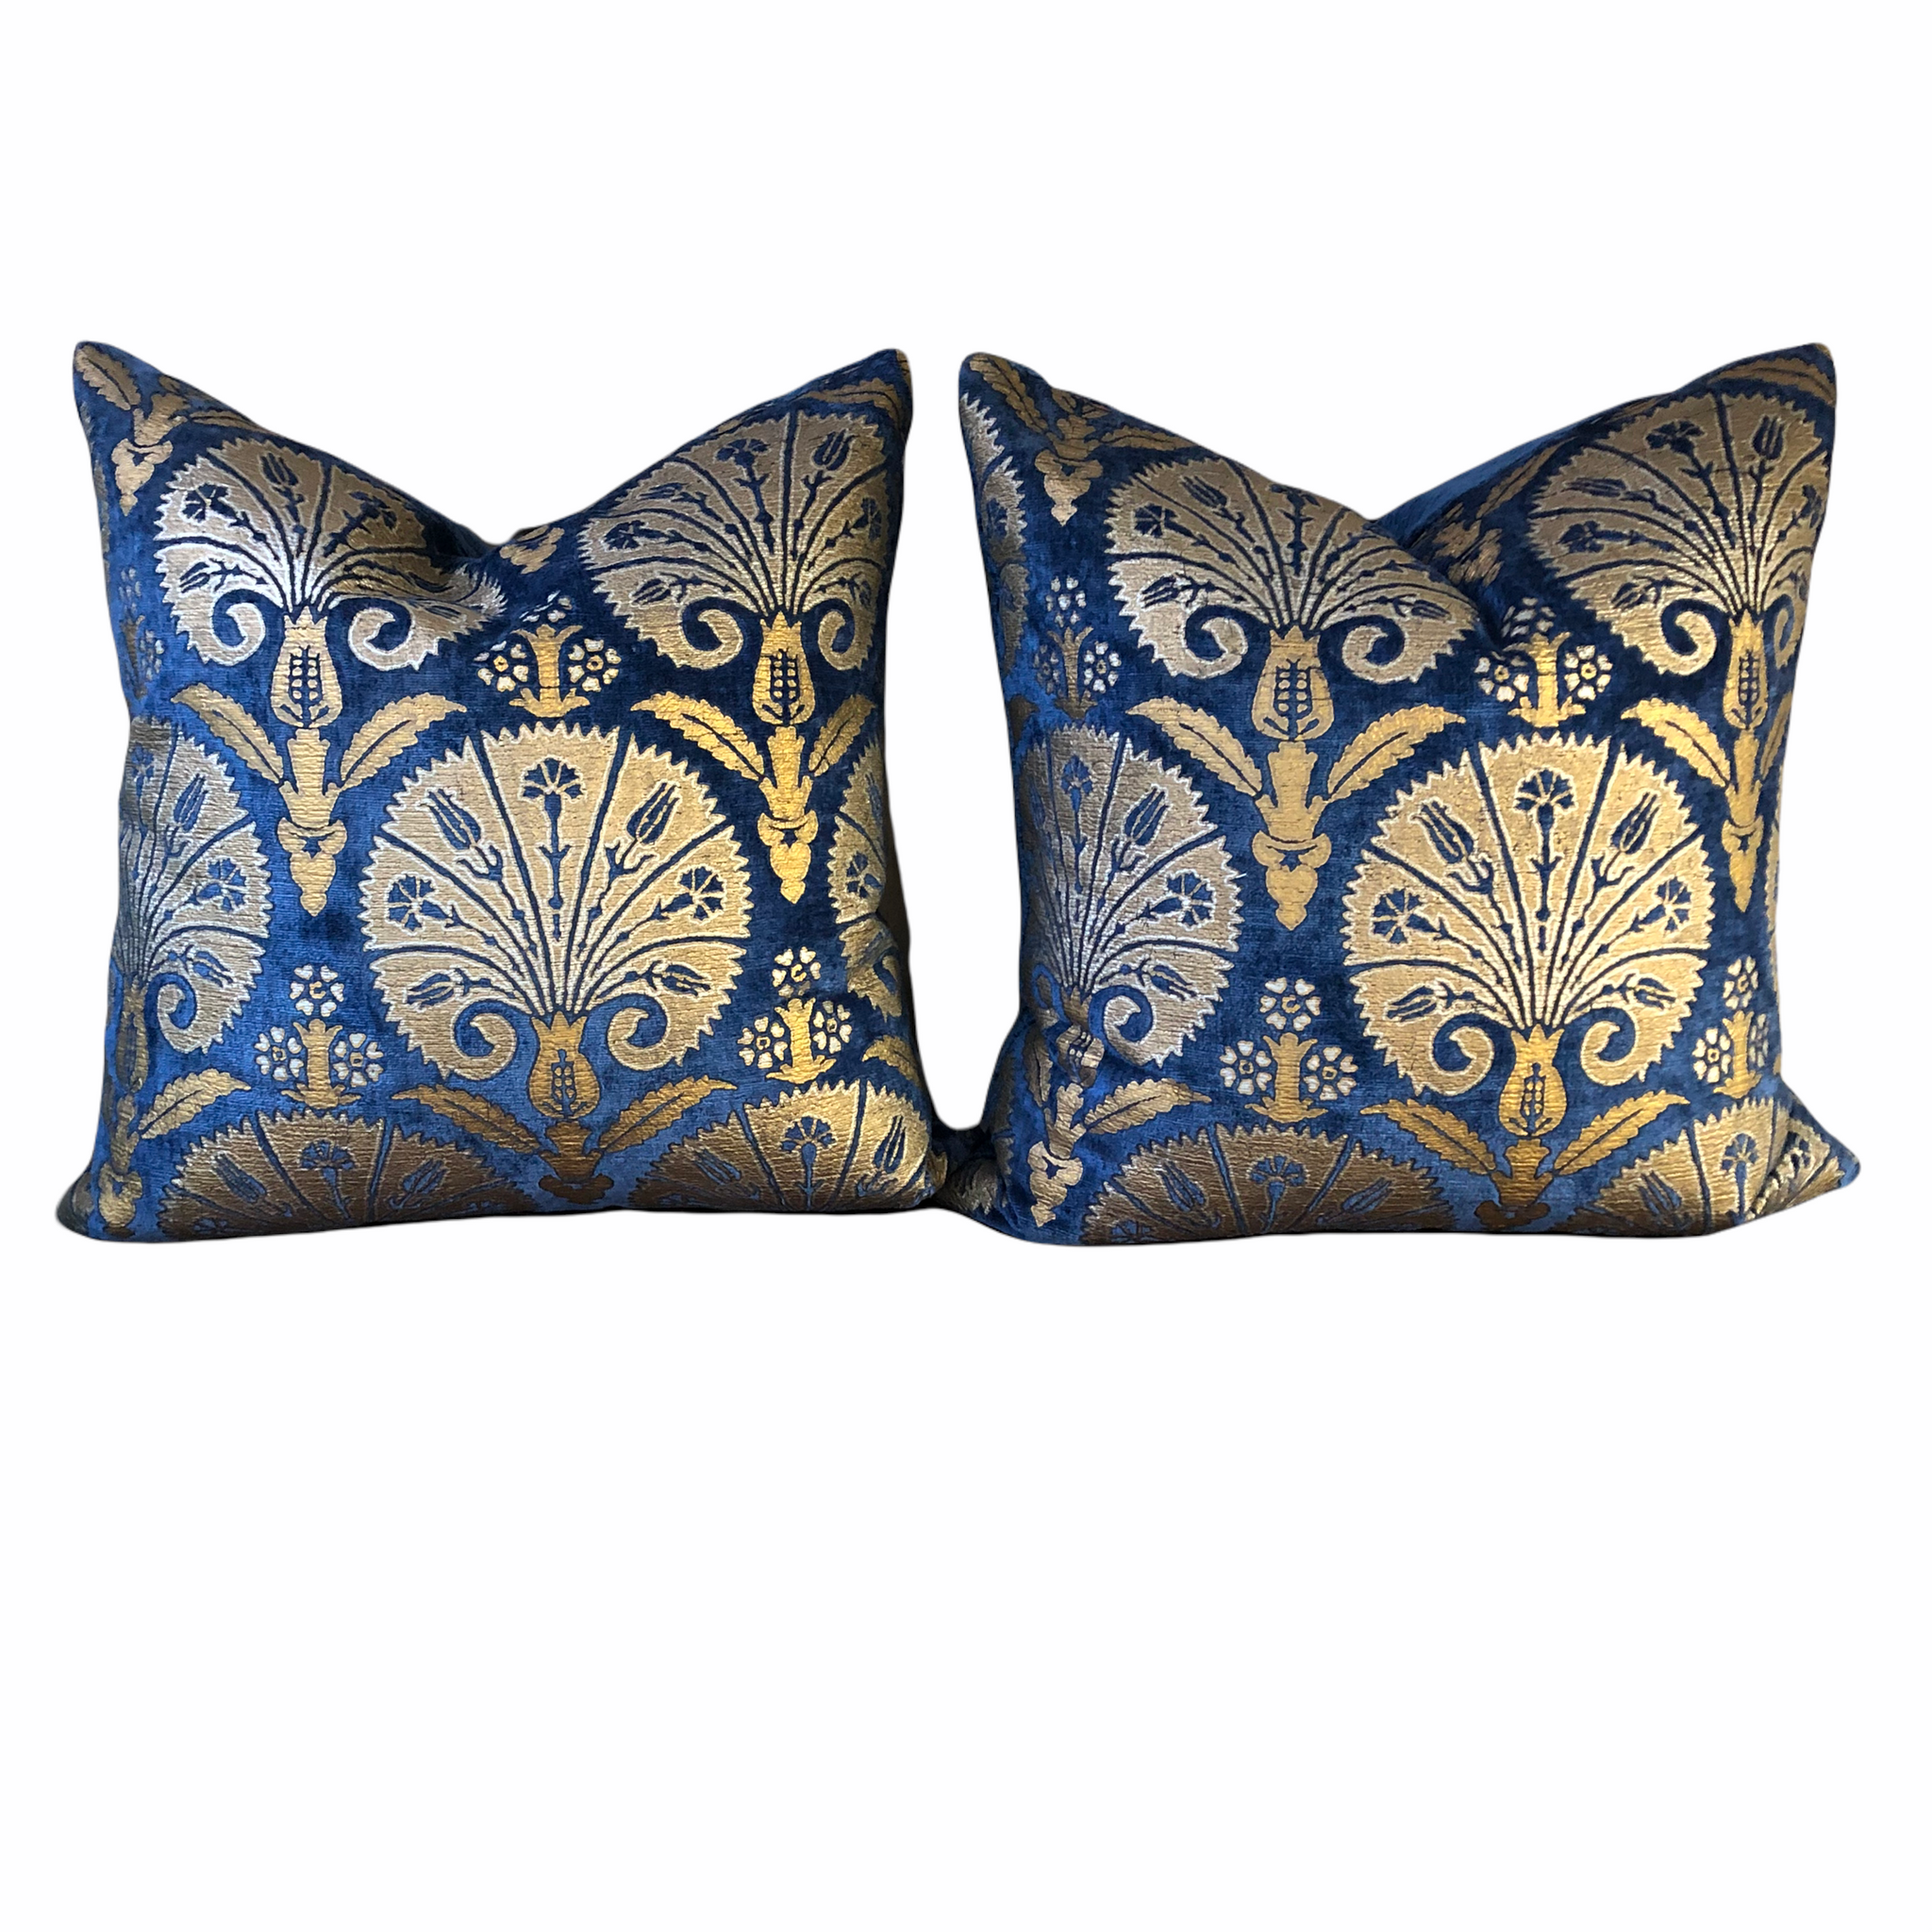 Venetian Pillows in Blue and Gold